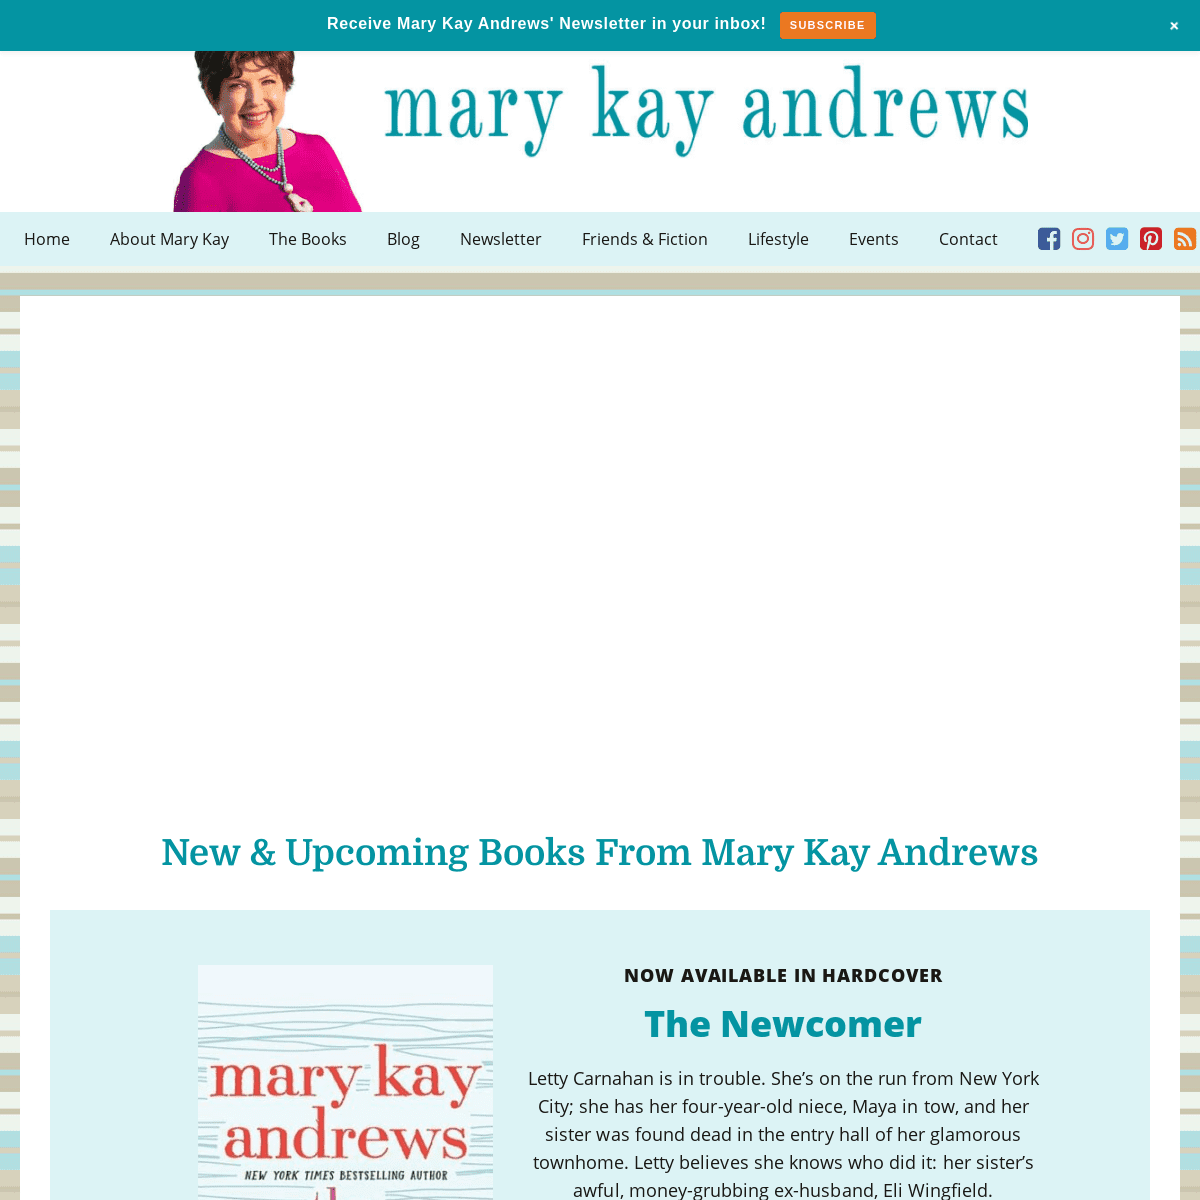 A complete backup of https://marykayandrews.com